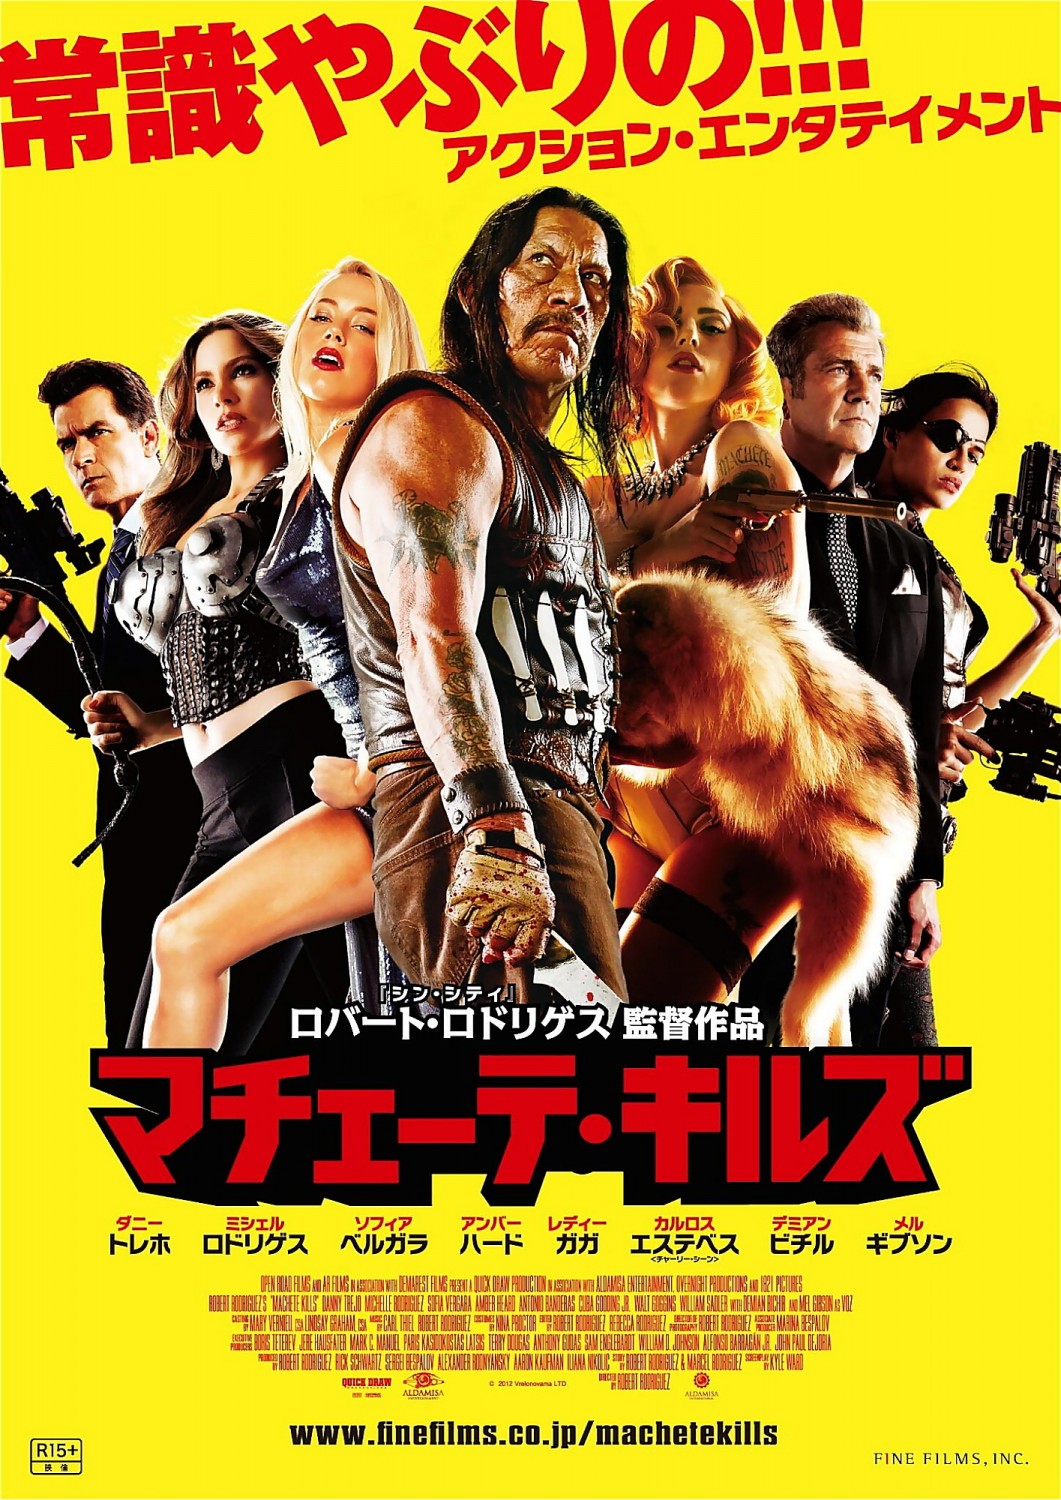 Extra Large Movie Poster Image for Machete Kills (#27 of 27)